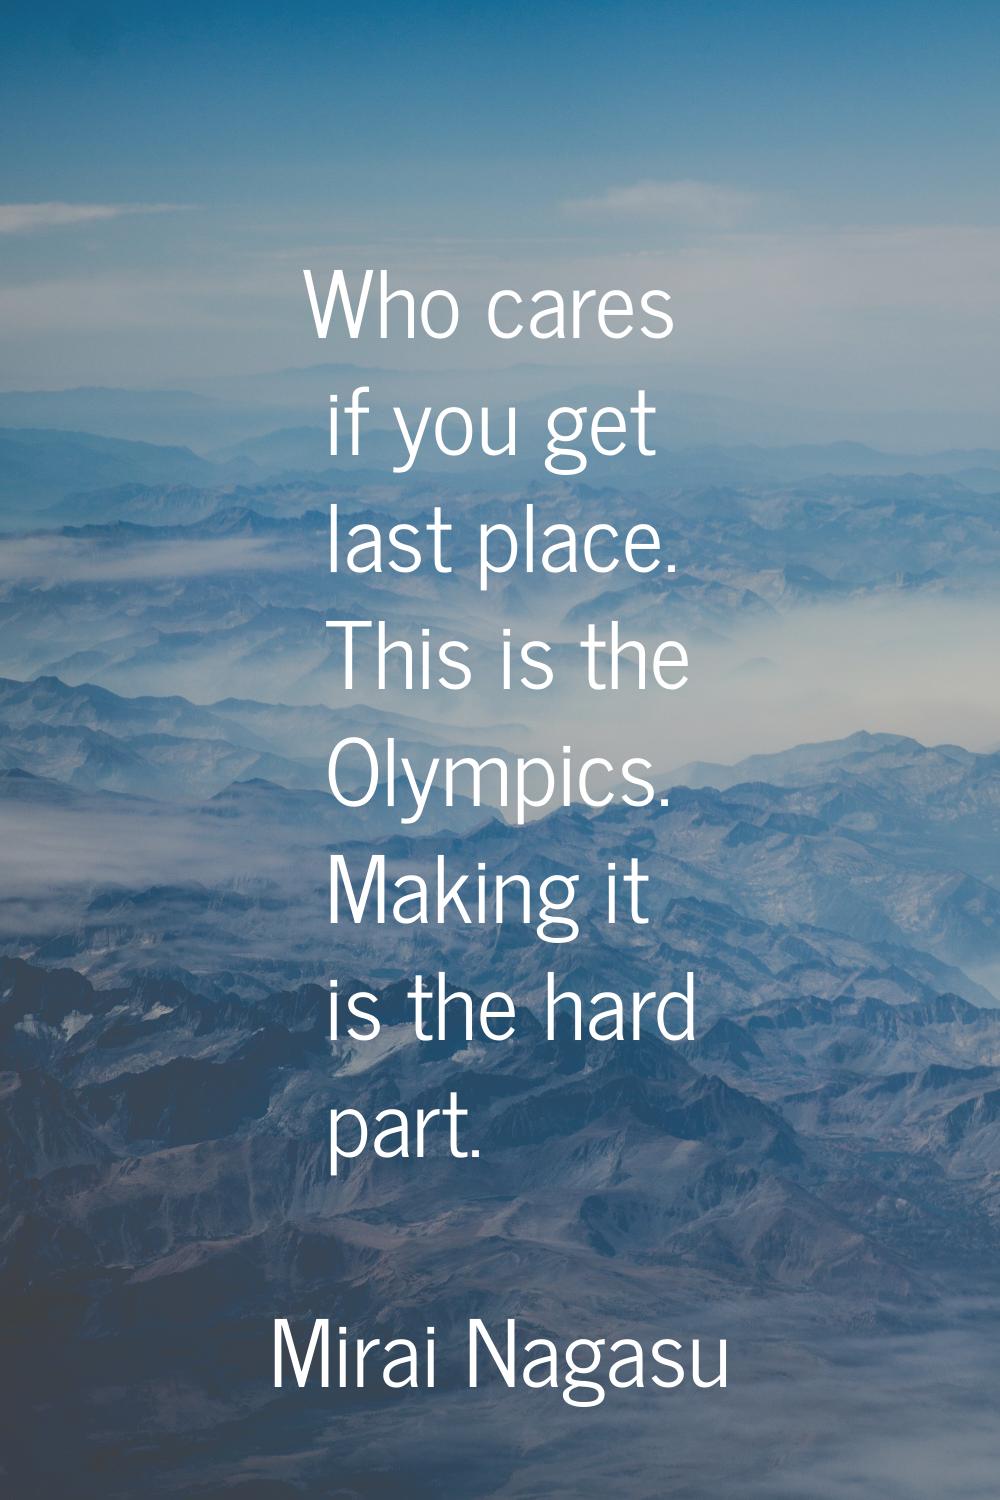 Who cares if you get last place. This is the Olympics. Making it is the hard part.